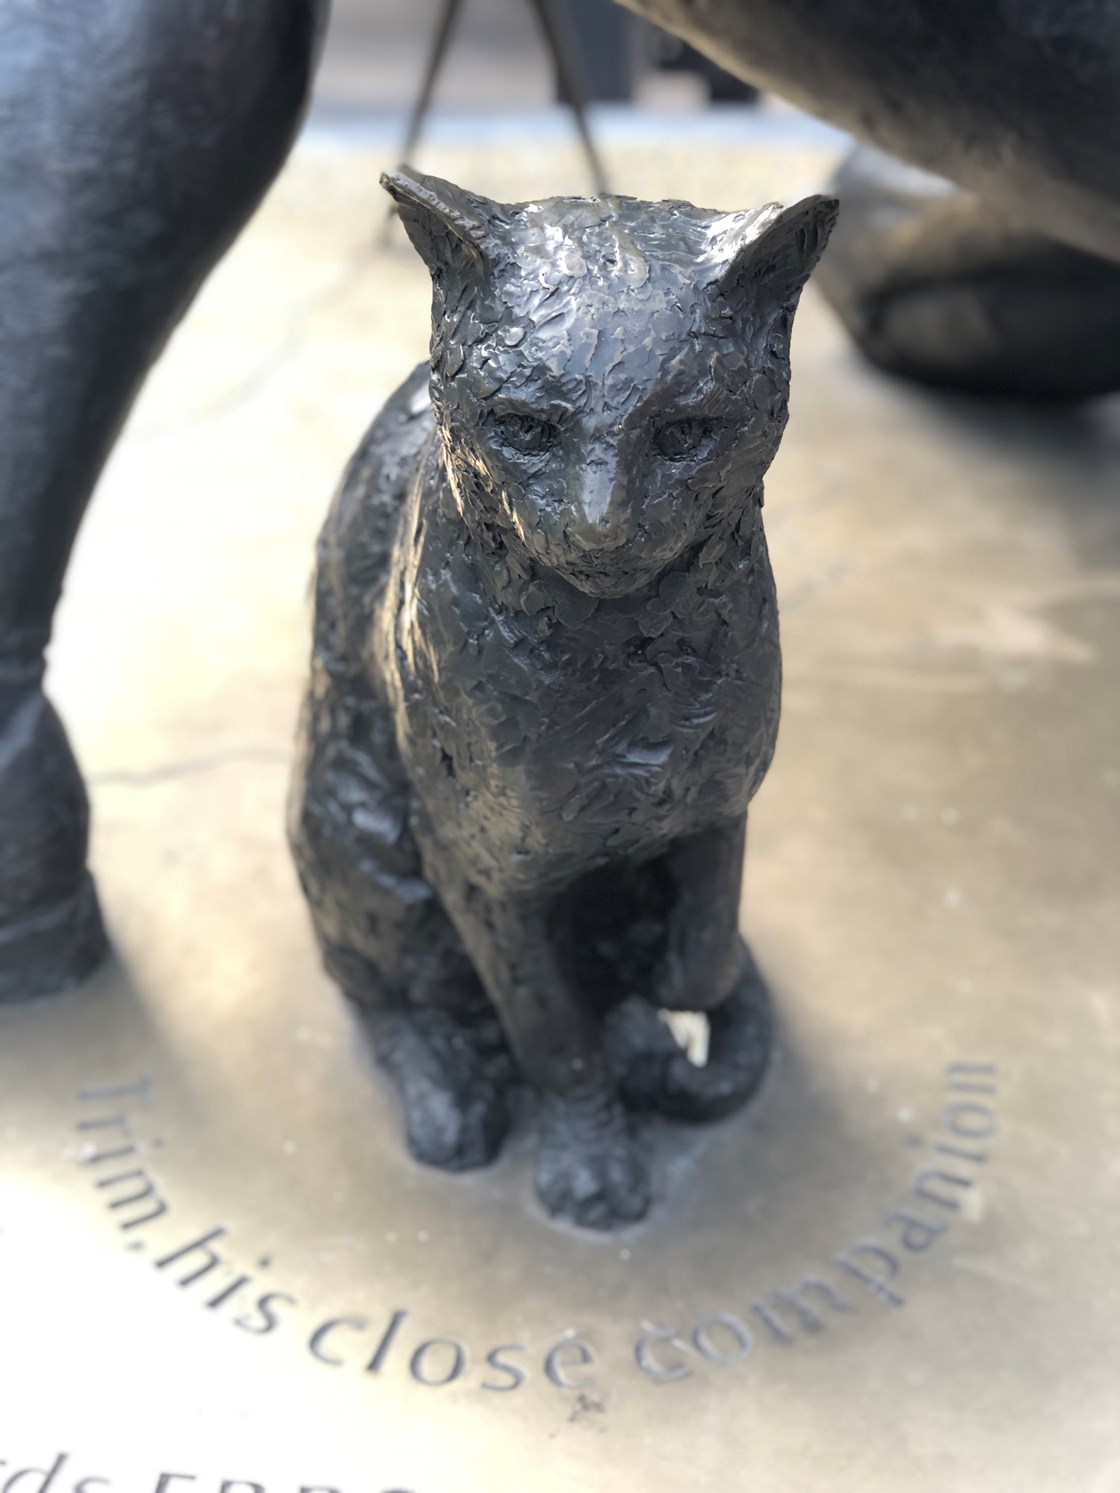 Trim the cat September 2020: Trim was a ship's cat who accompanied Matthew Flinders on his voyages to circumnavigate and map the coastline of Australia
(Captain Matthew Flinders, Euston, Britain's Biggest Dig, London)
Internal Asset No. 18788